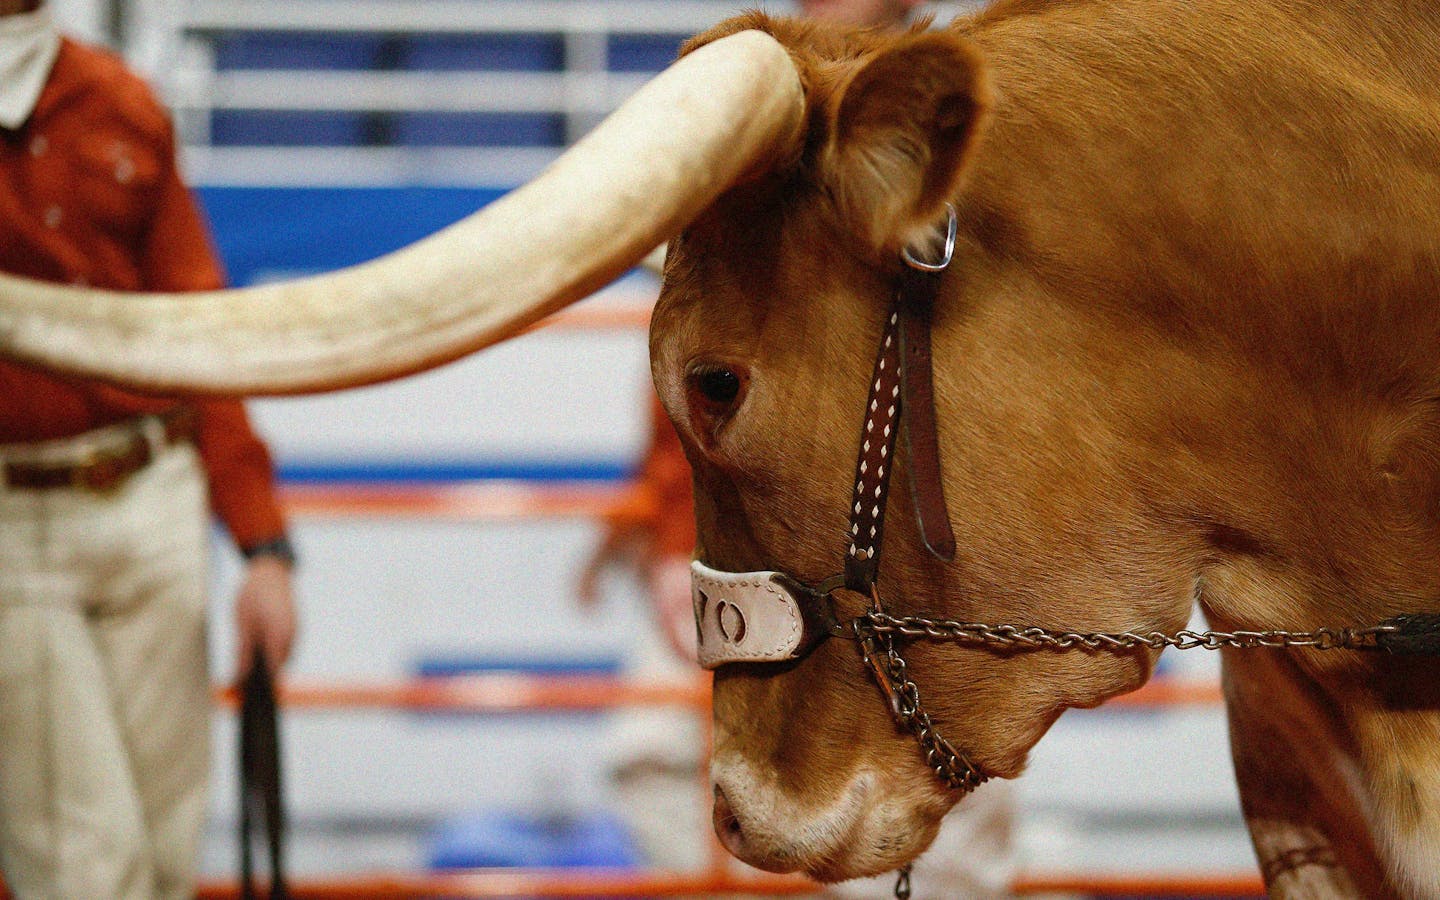 The History of Longhorn Sports